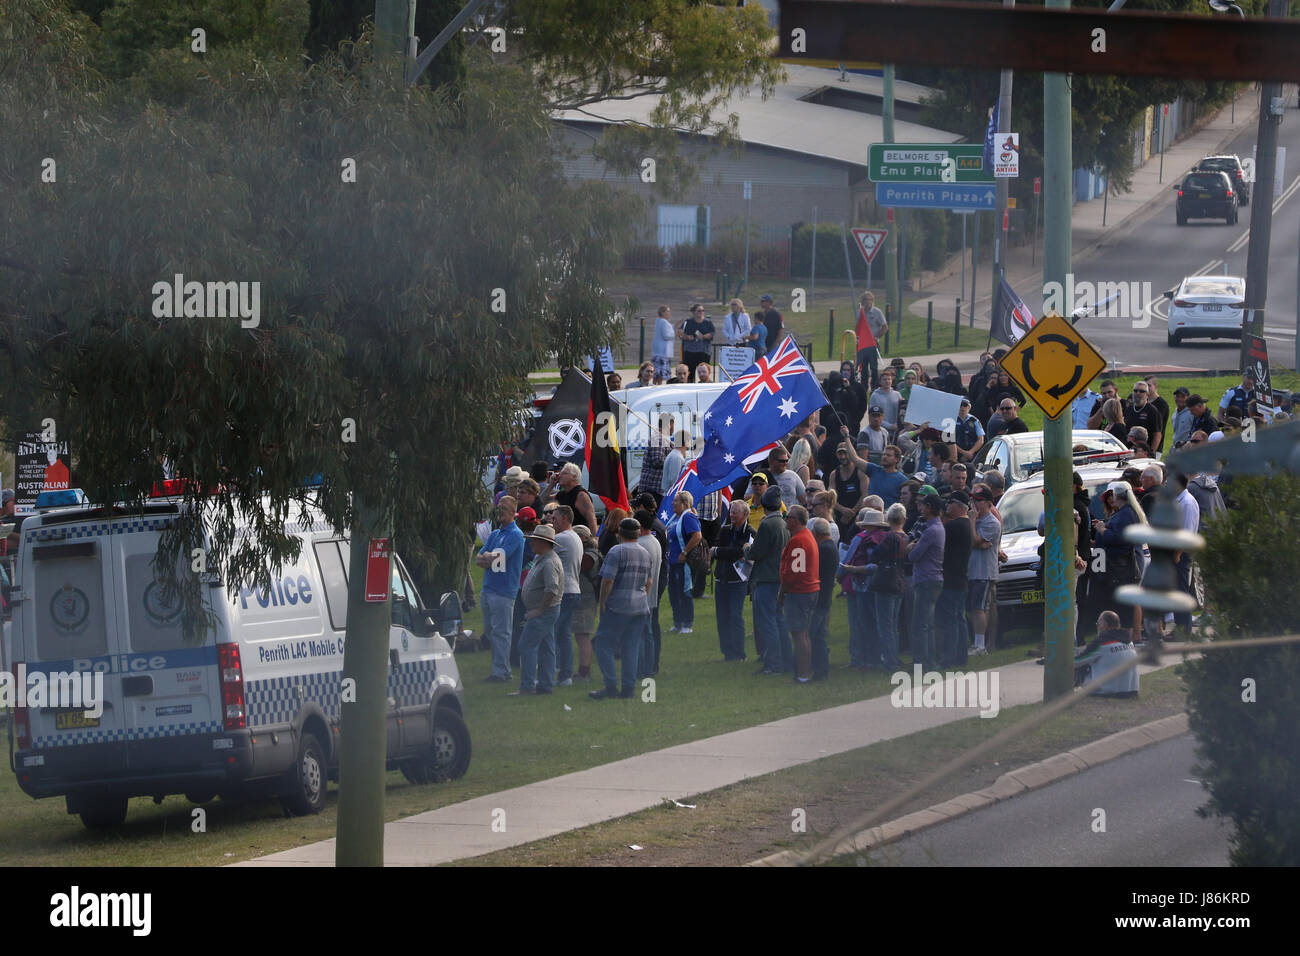 Sydney, Australia. 28 May 2017. Party for Freedom organised a protest in Penrith to the west of Sydney calling on the “treasonous Penrith Council, it’s Mayor John Thain and Councillors” to vote against the development application for an Islamic school to be built in the heart of Penrith. Counter protesters believed to be from a group calling themselves ‘Antifa’ or ‘anti-fascists’ also turned up. Credit: Richard Milnes/Alamy Live News Stock Photo